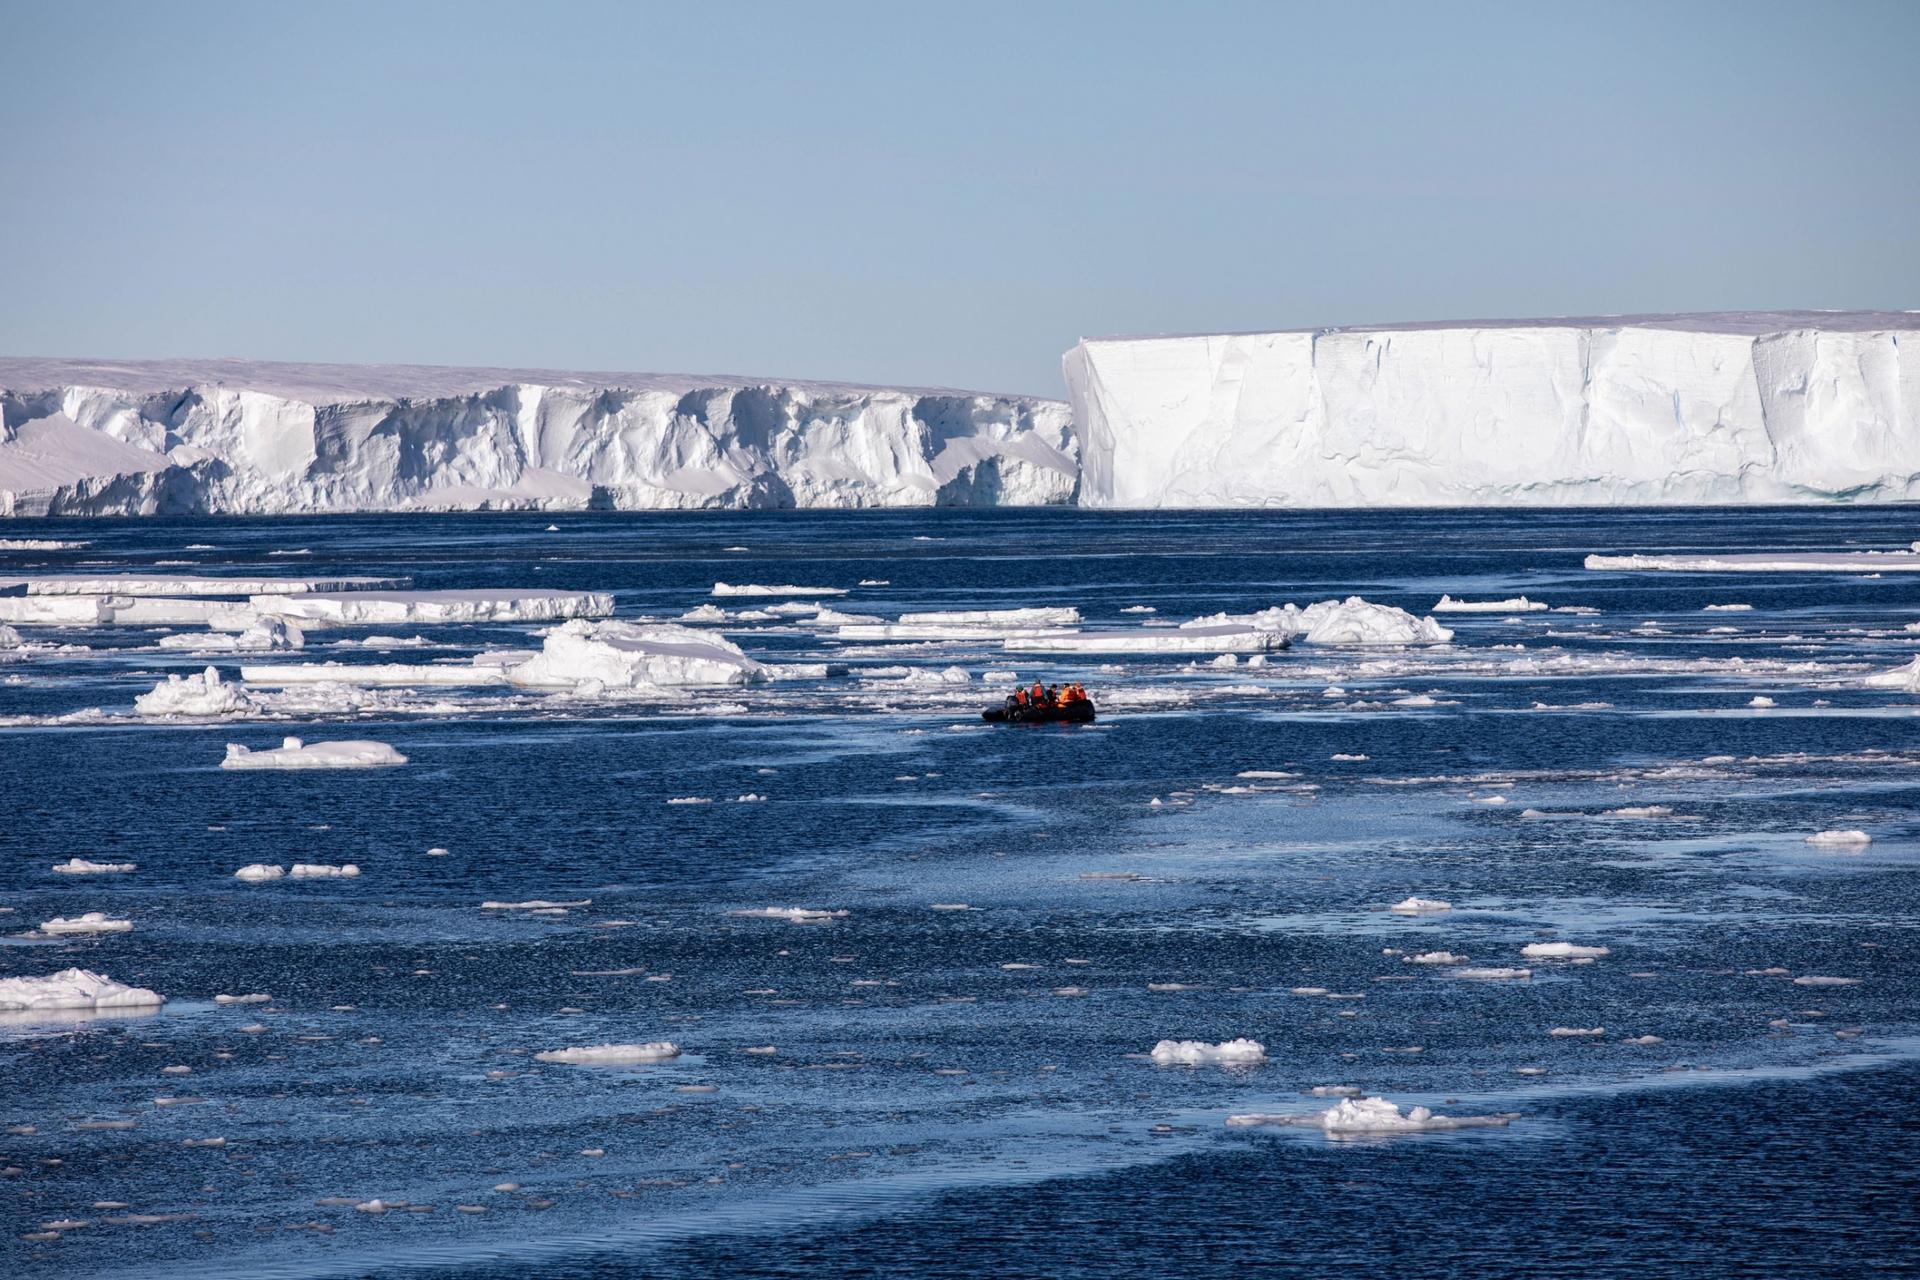 A Zodiac boat is shown off in the distance with several people aboard with large white floating ice all around.